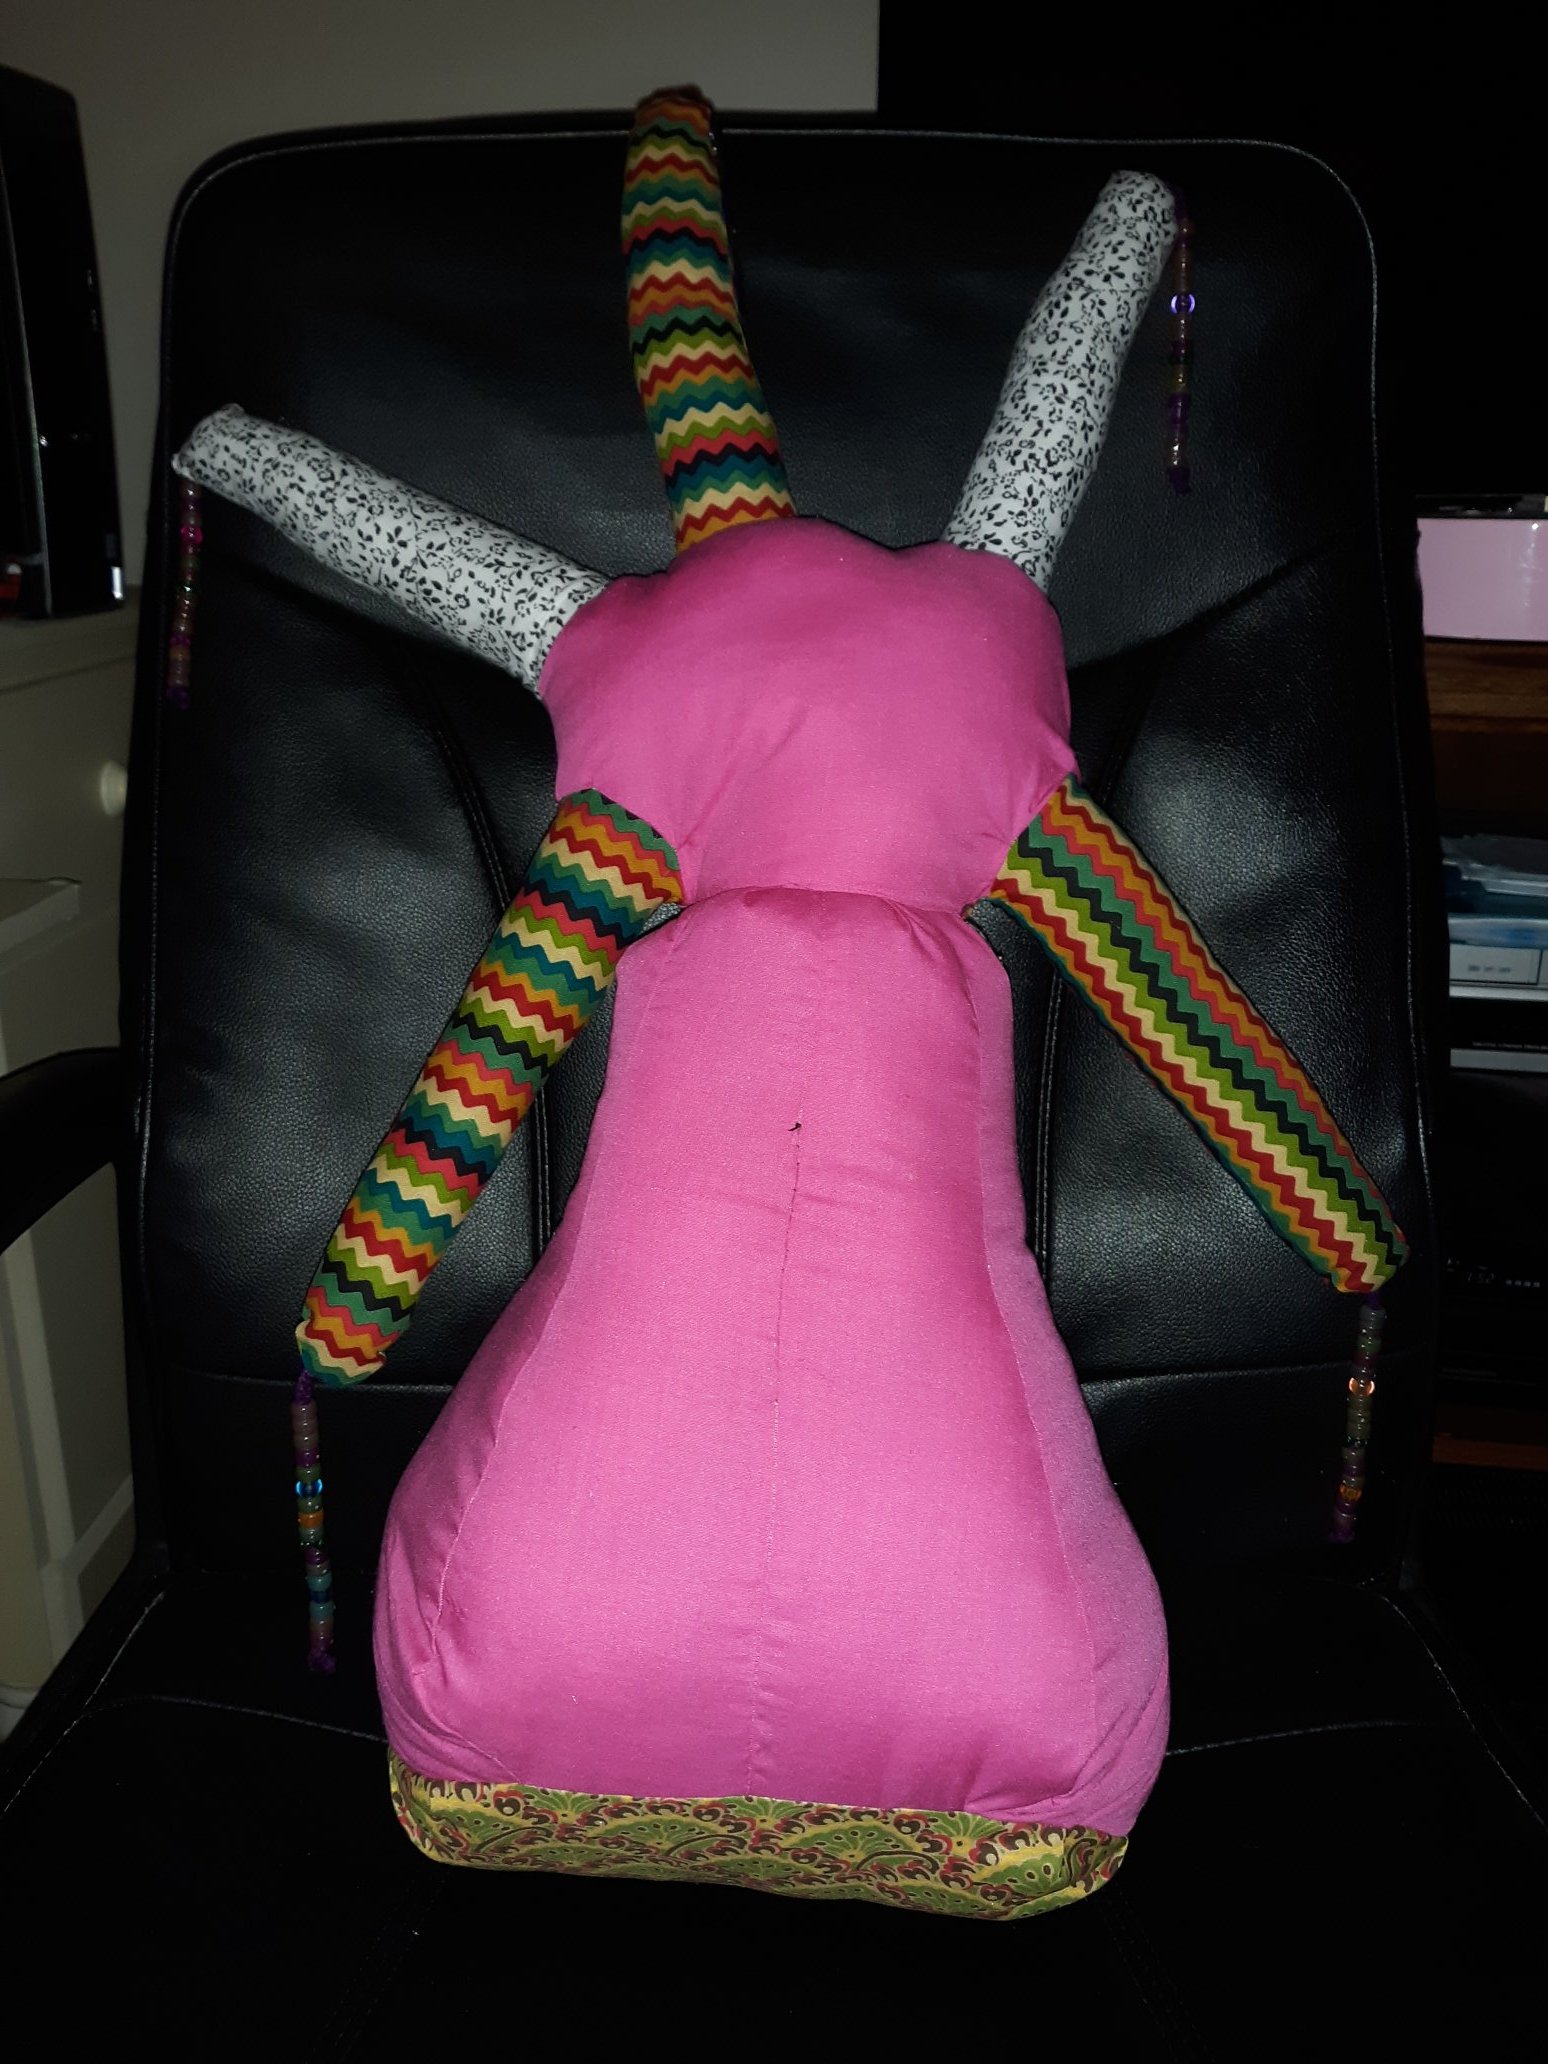 The back of the doll. It's the same as the front, but with no face. The legs are hidden.